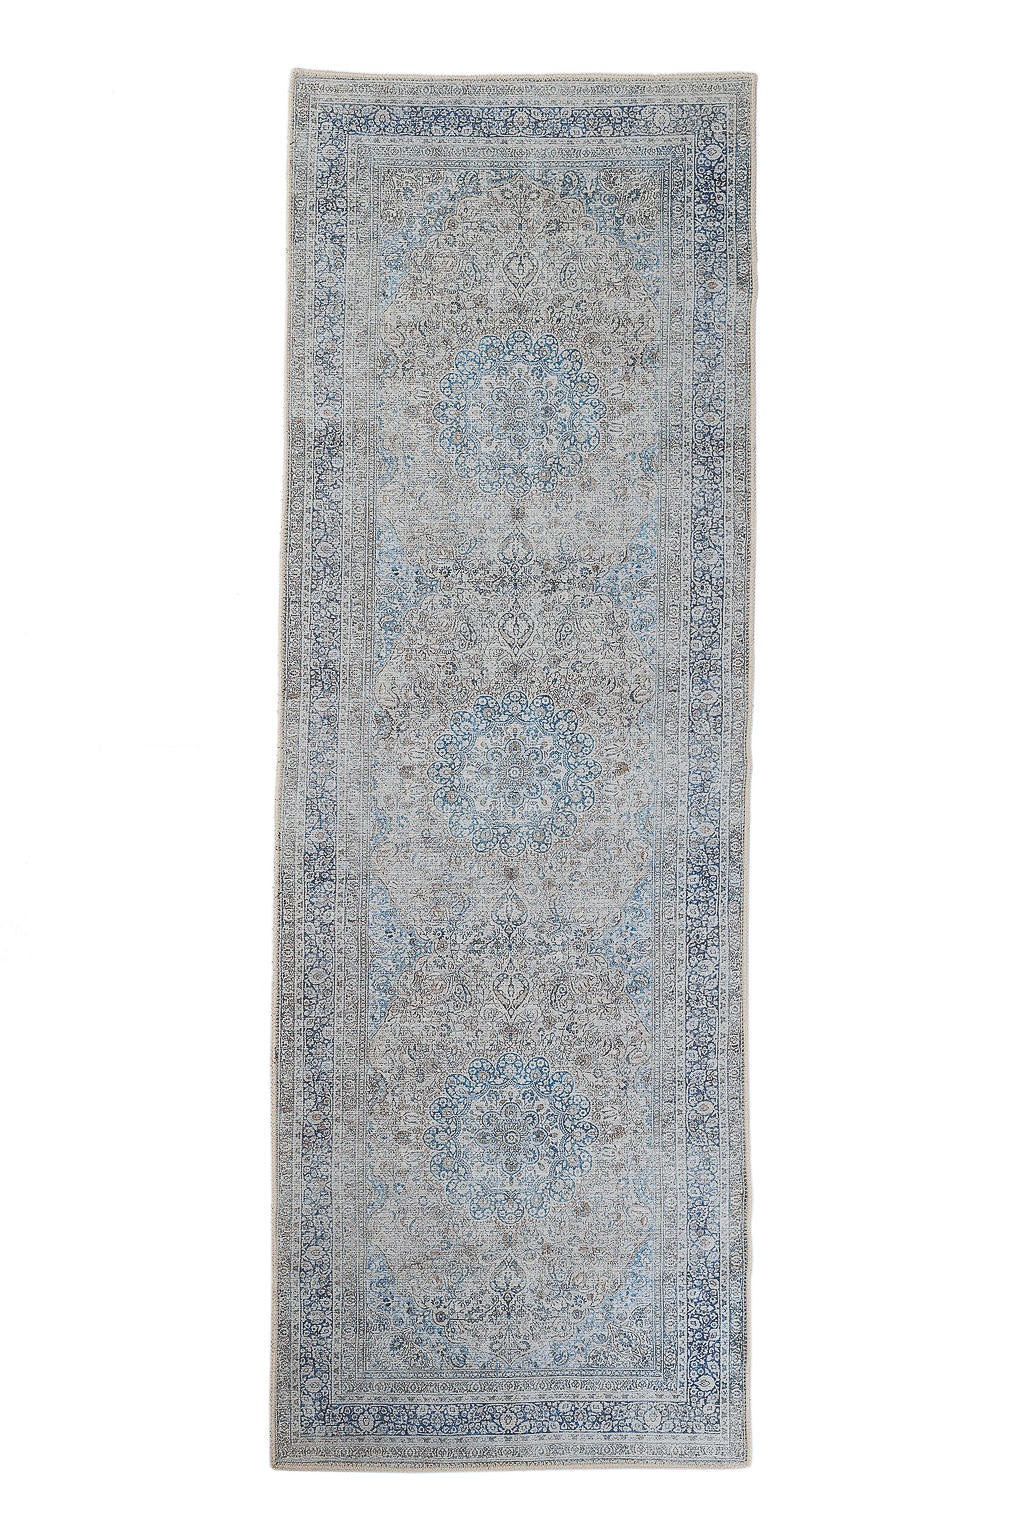 Grey and blue bordered vintage style runner